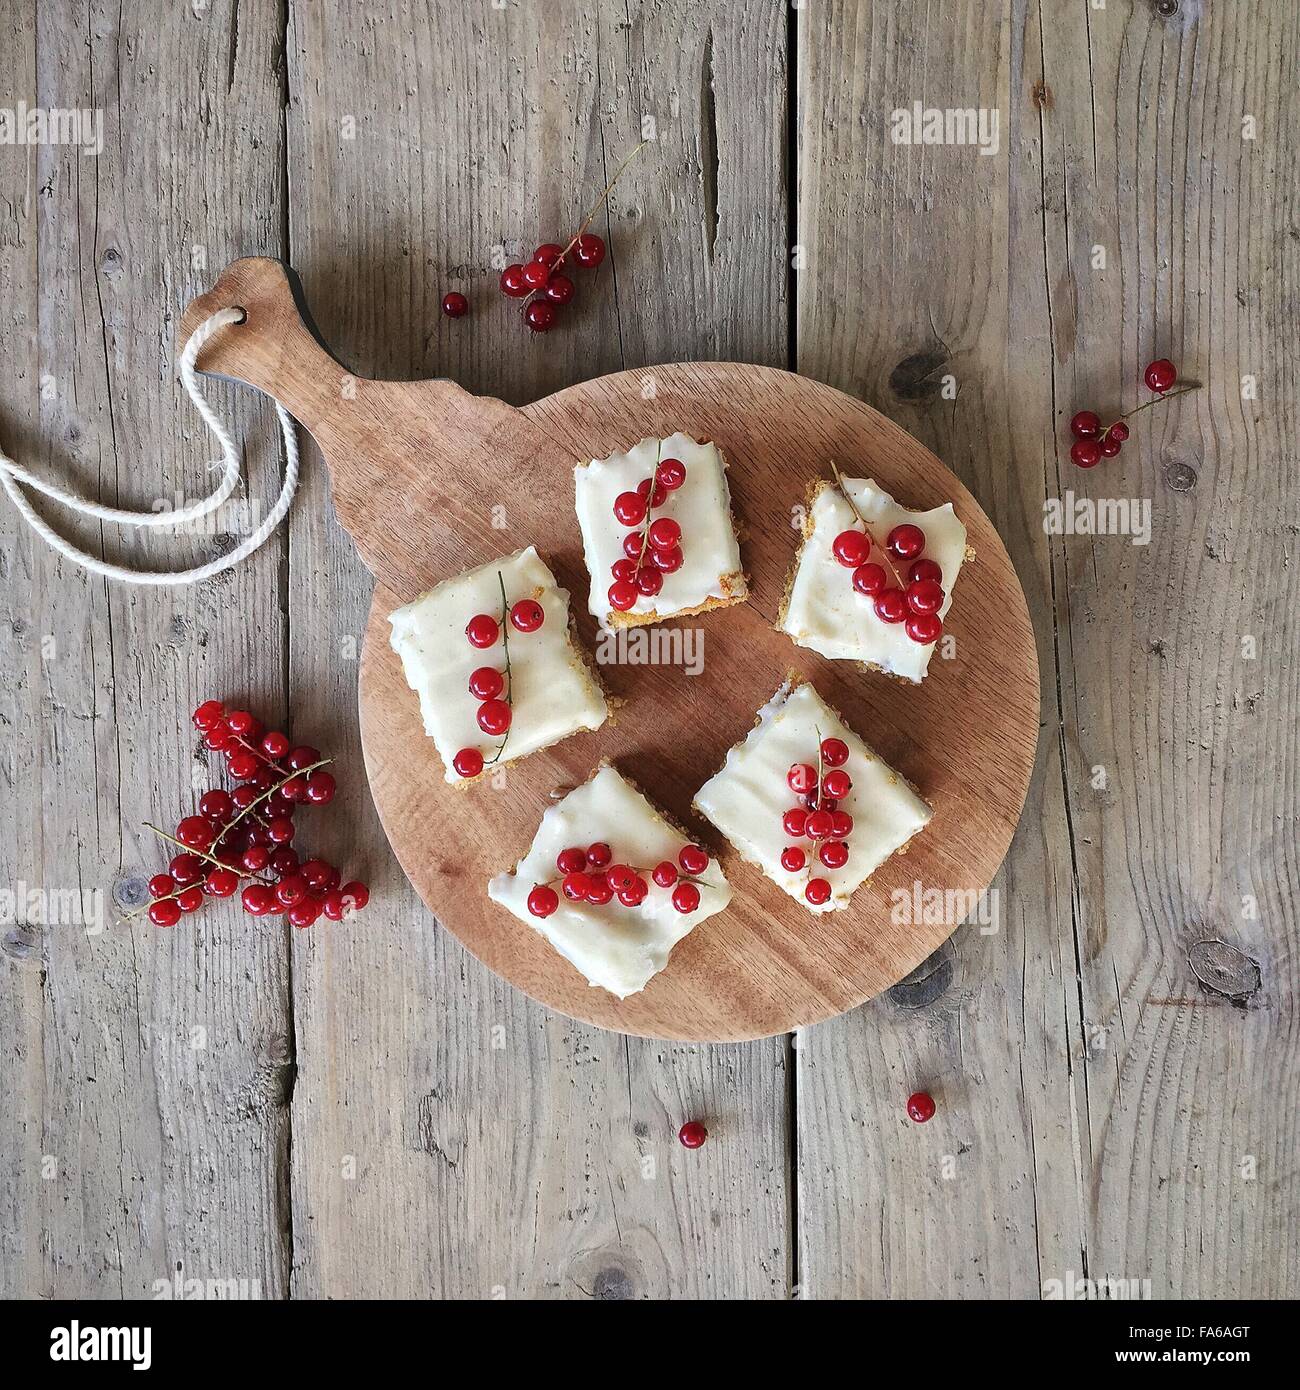 Overhead view of carrot cake with redcurrants on a chopping board Stock Photo